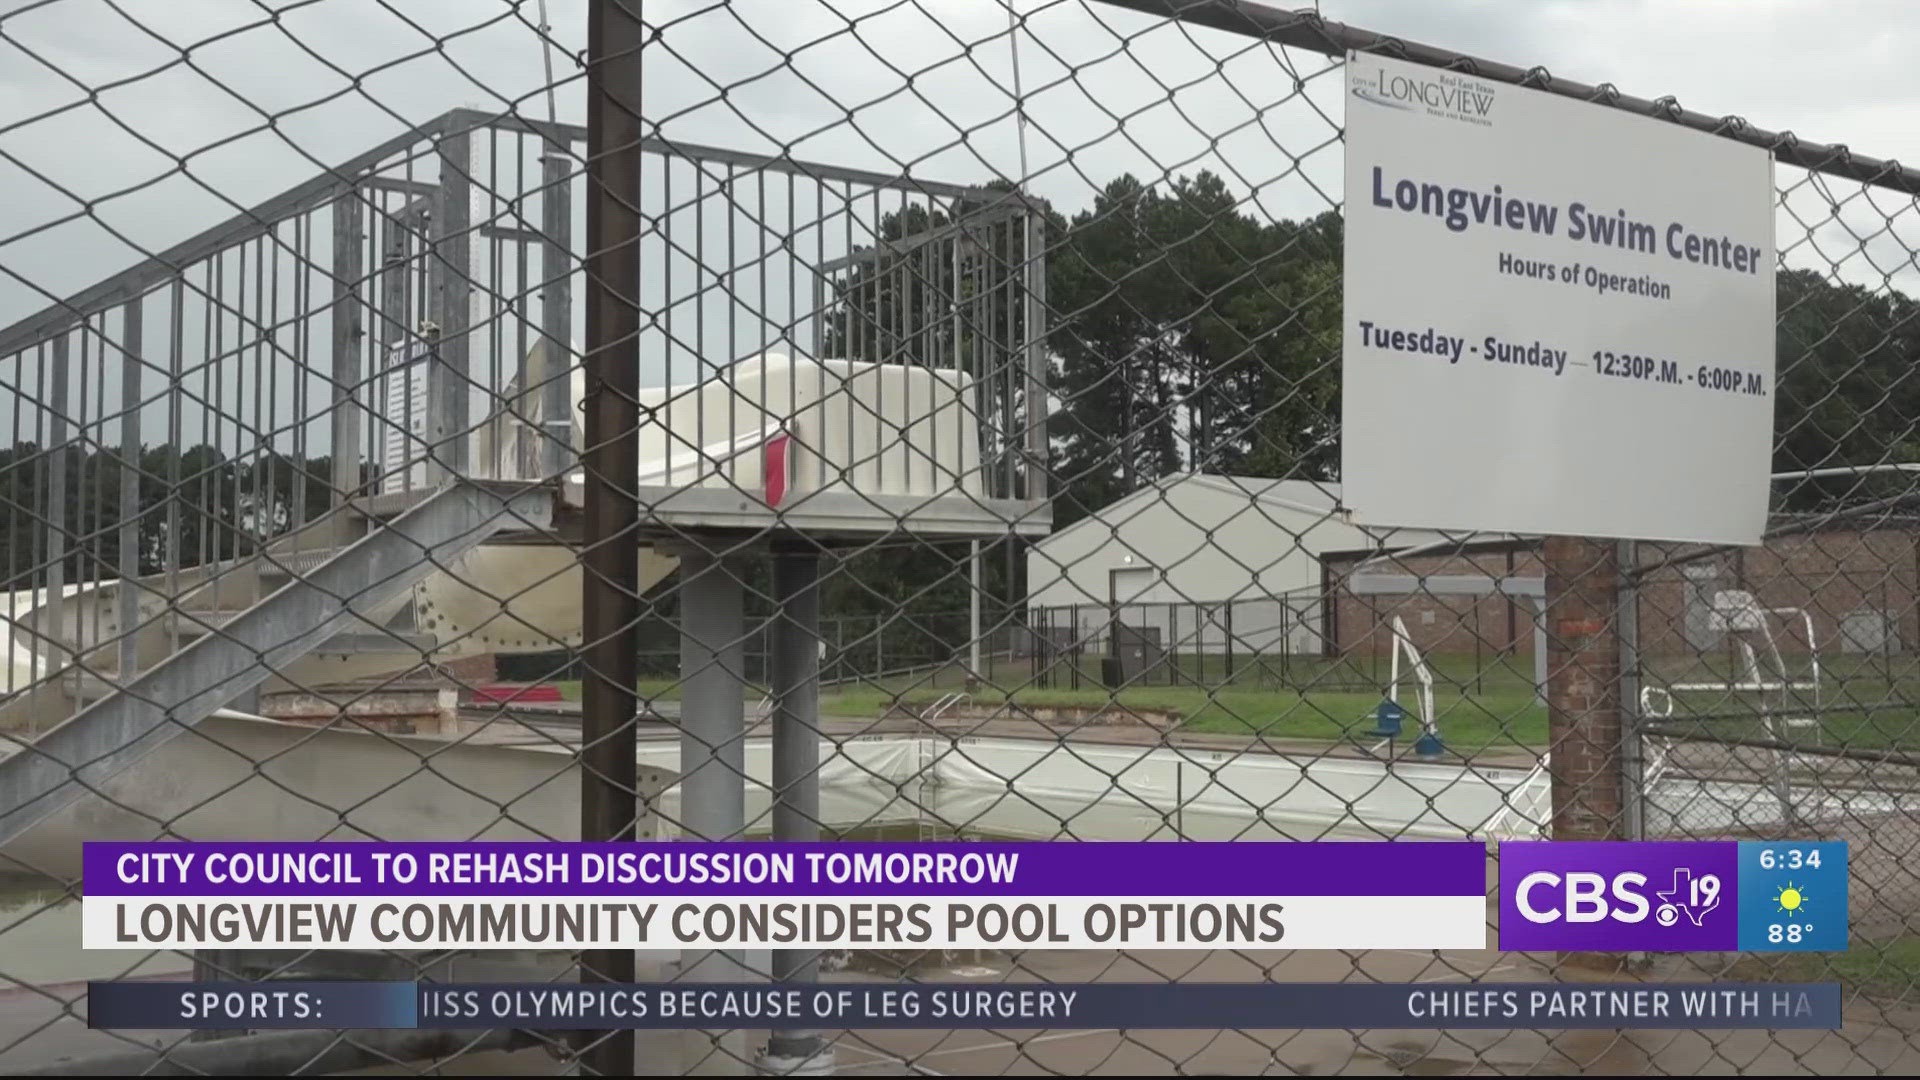 With plans of demolition in the future, the Longview swim center is an item of discussion at the upcoming city council meeting